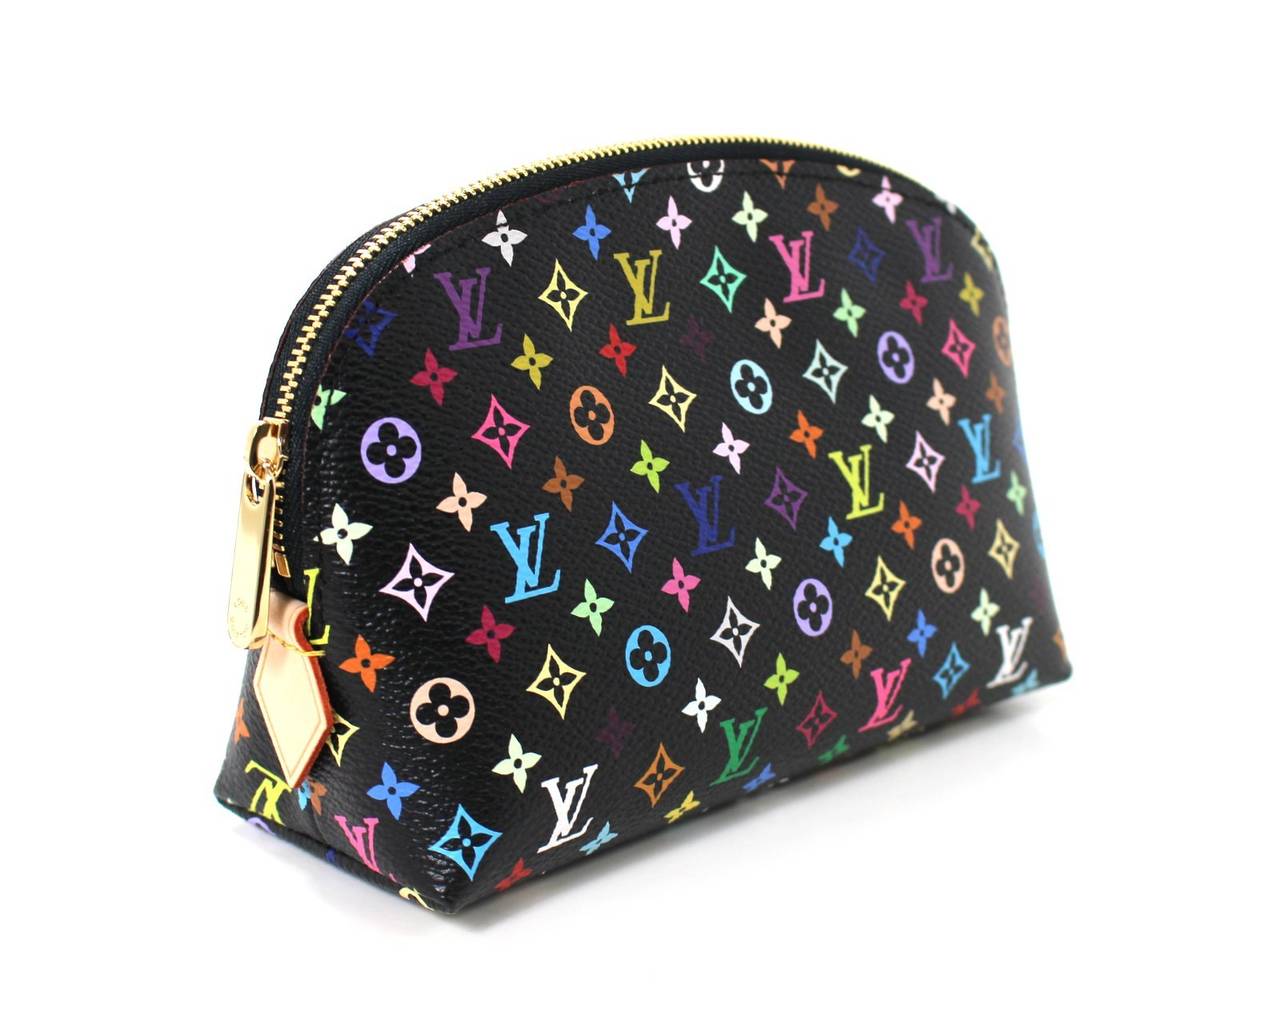 NEW with box, Never Carried- Louis Vuitton Multicolore Clutch Cosmetic Case in Black
Louis Vuitton dust bag, care booklet and box included. Retired and Sold Out style, no longer available anywhere.  
Designed by artist Takashi Murakami with Marc